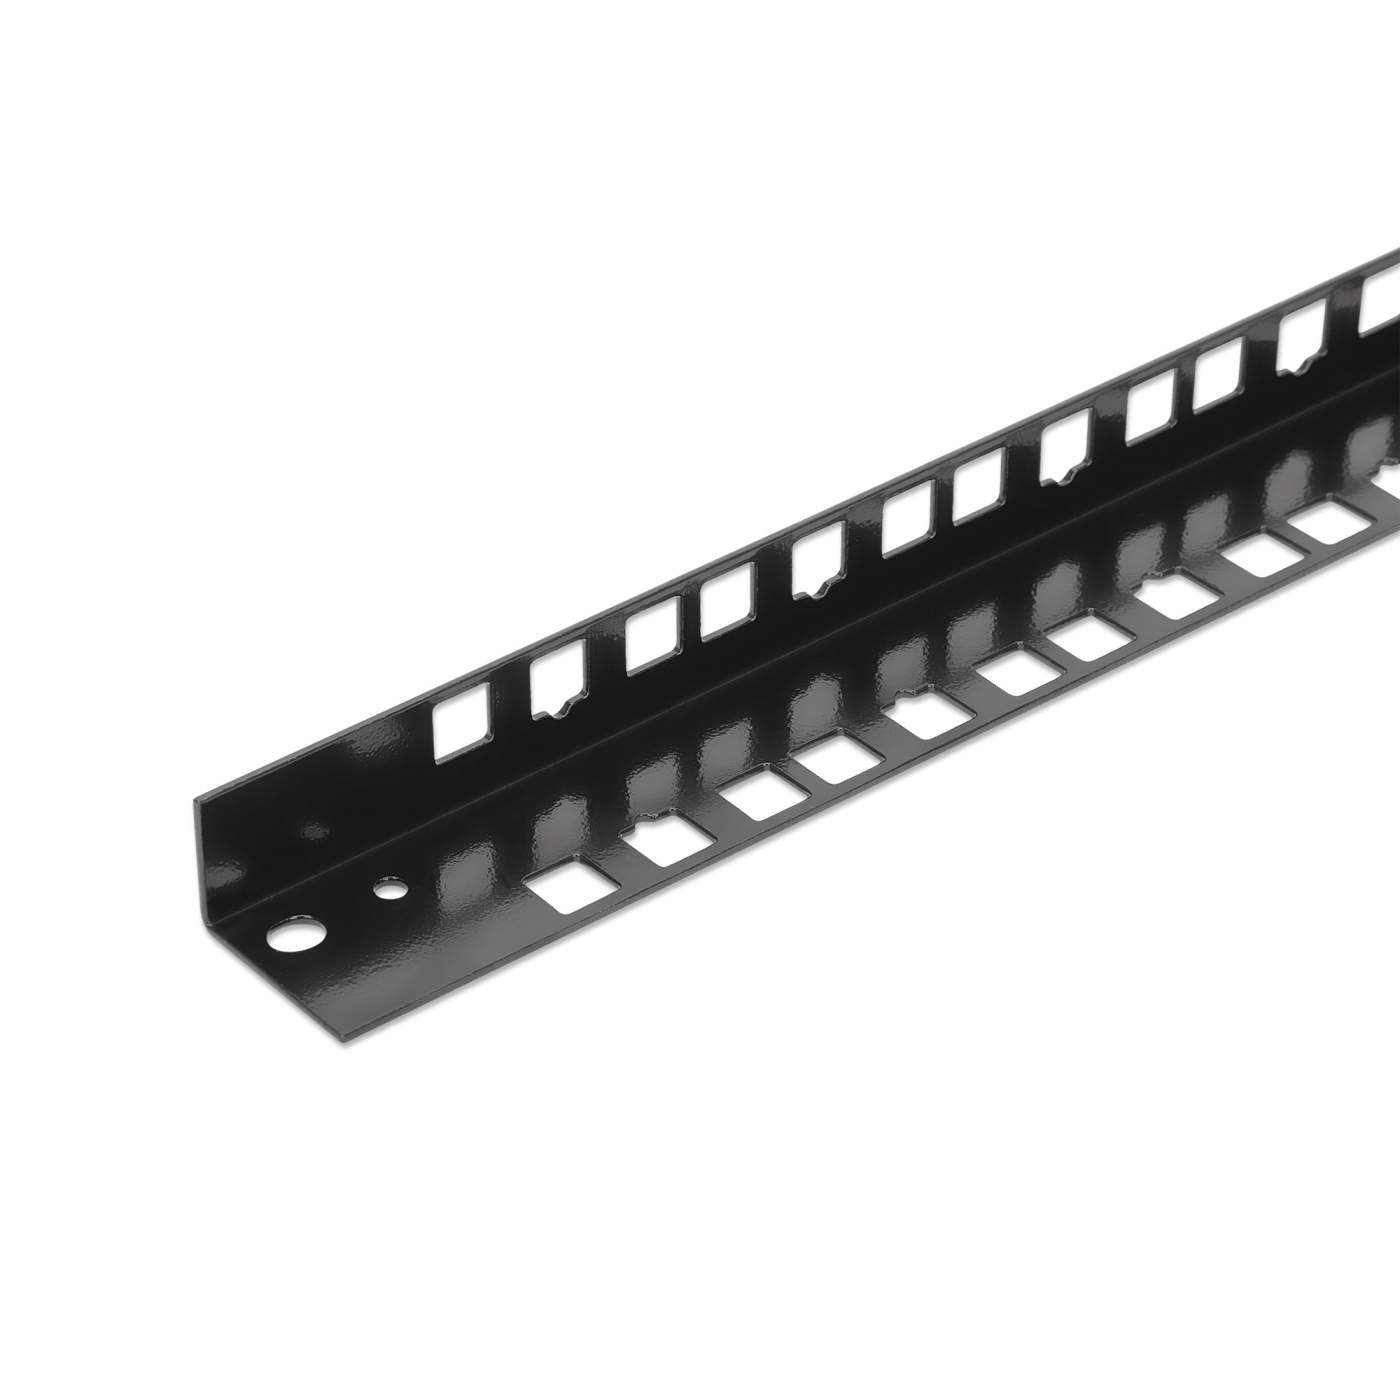 Spare Rails for 19" Wallmount Cabinets, 9U Image 4